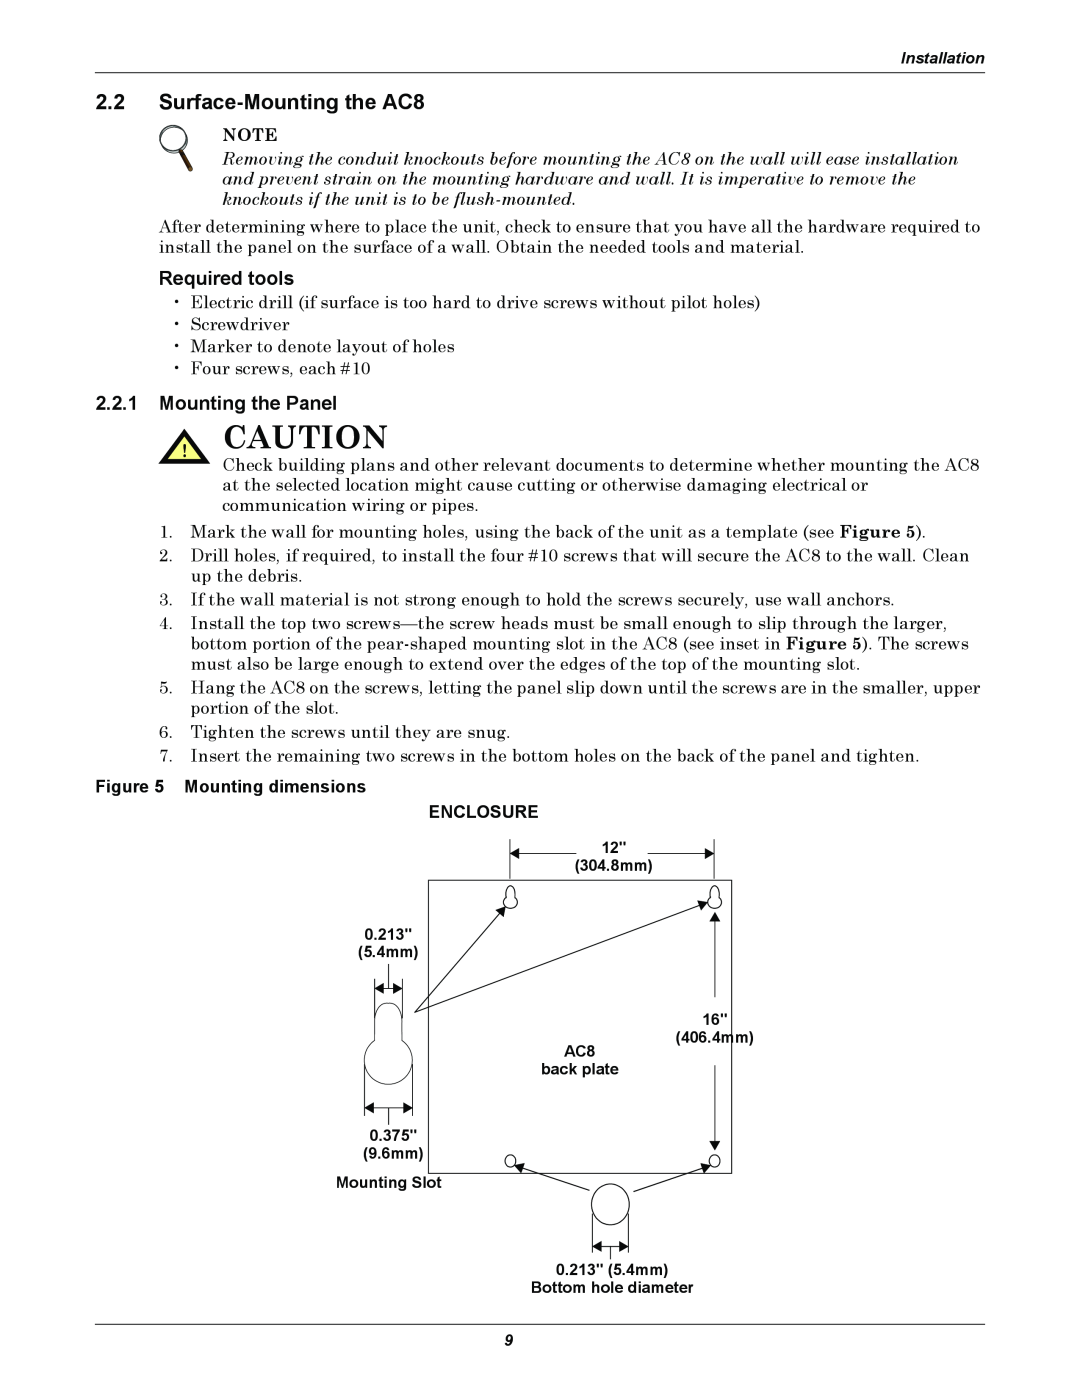 Emerson user manual 2.2Surface-Mountingthe AC8, Required tools, Mounting the Panel, Mounting dimensions ENCLOSURE 